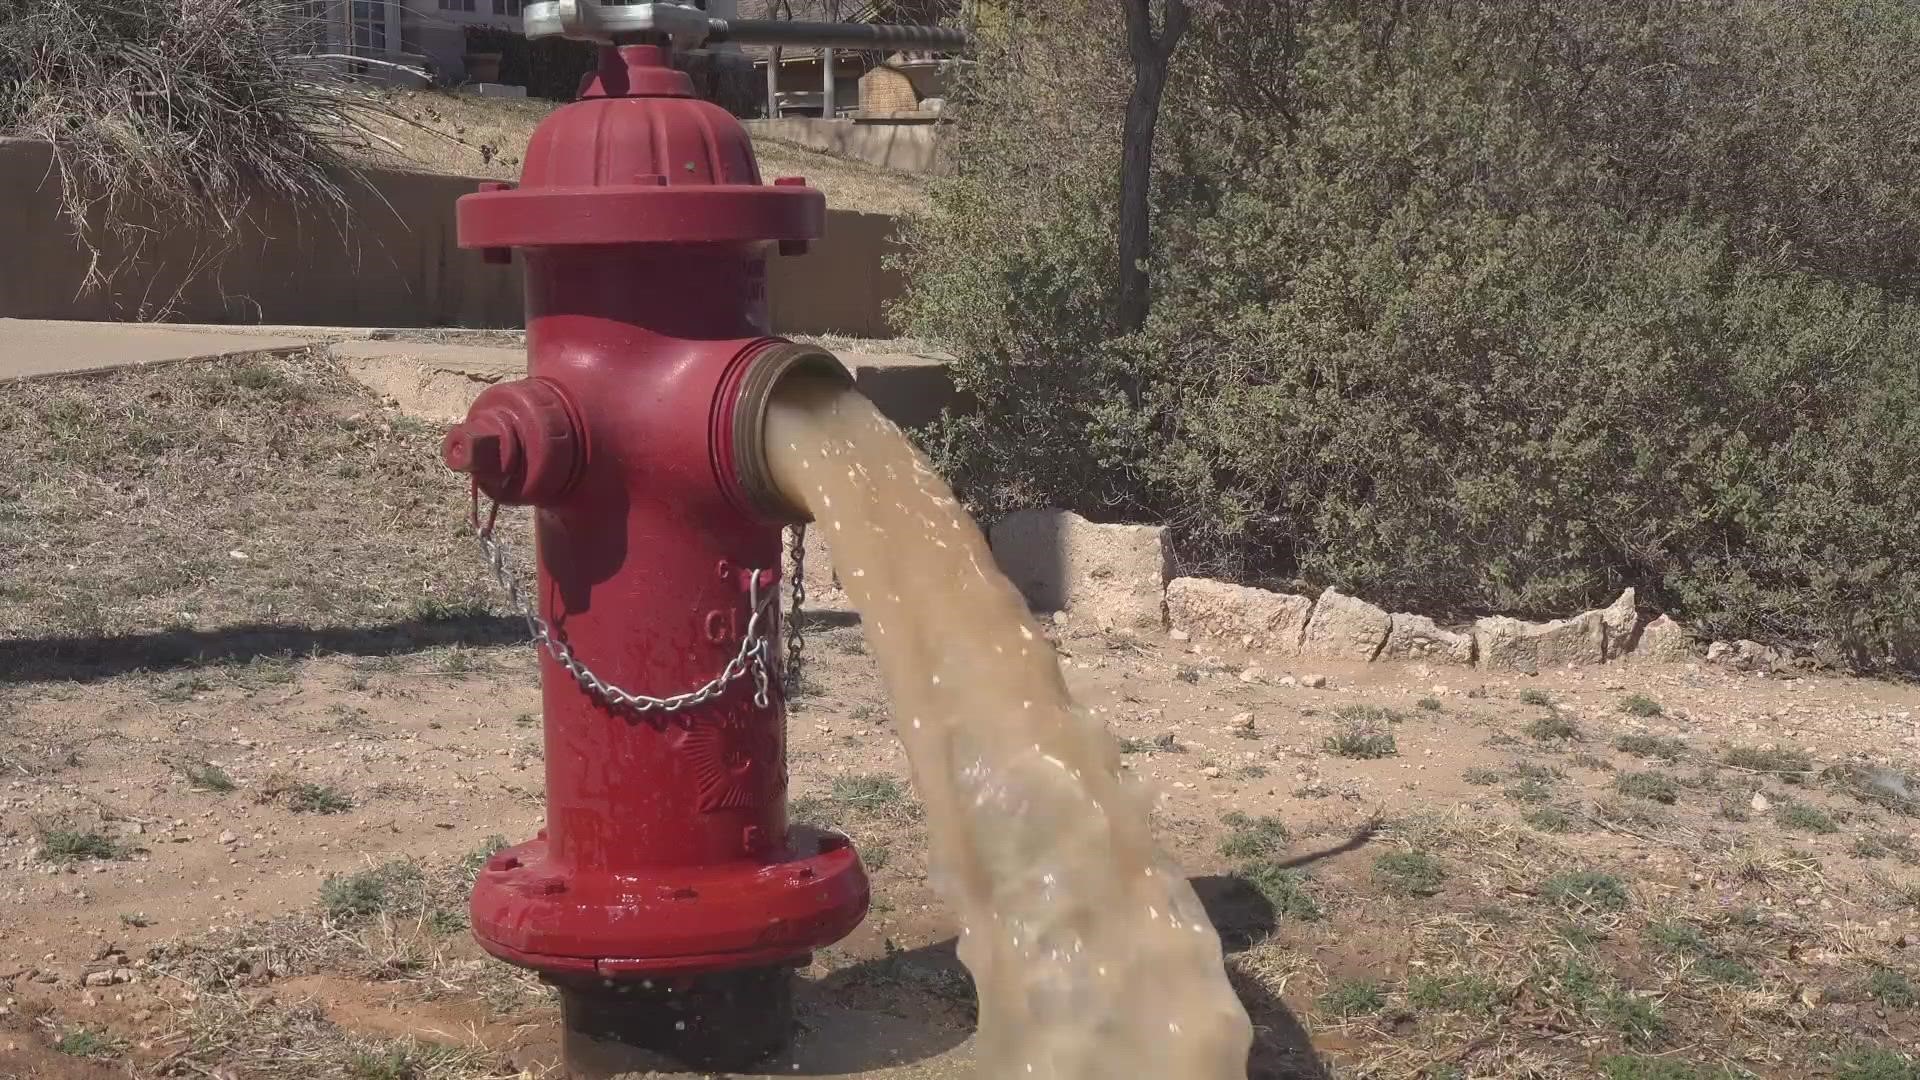 The main water line suffered a 20-inch break on Sunday.